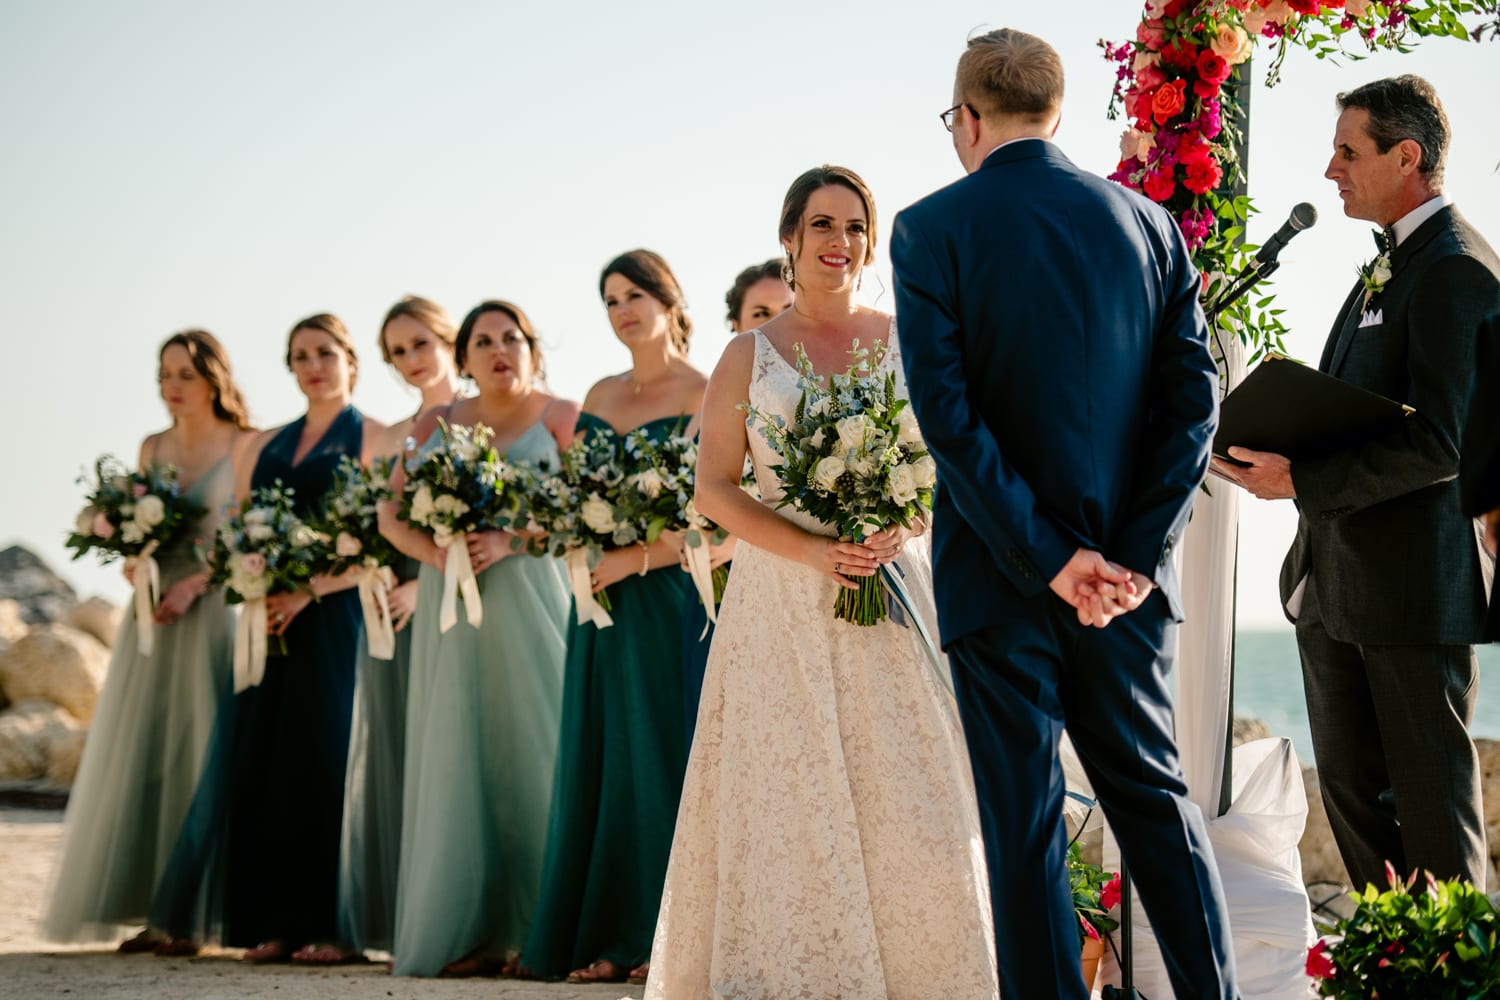 A fort zachary taylor wedding ceremony on the beach with bridesmaids and groomsmen.